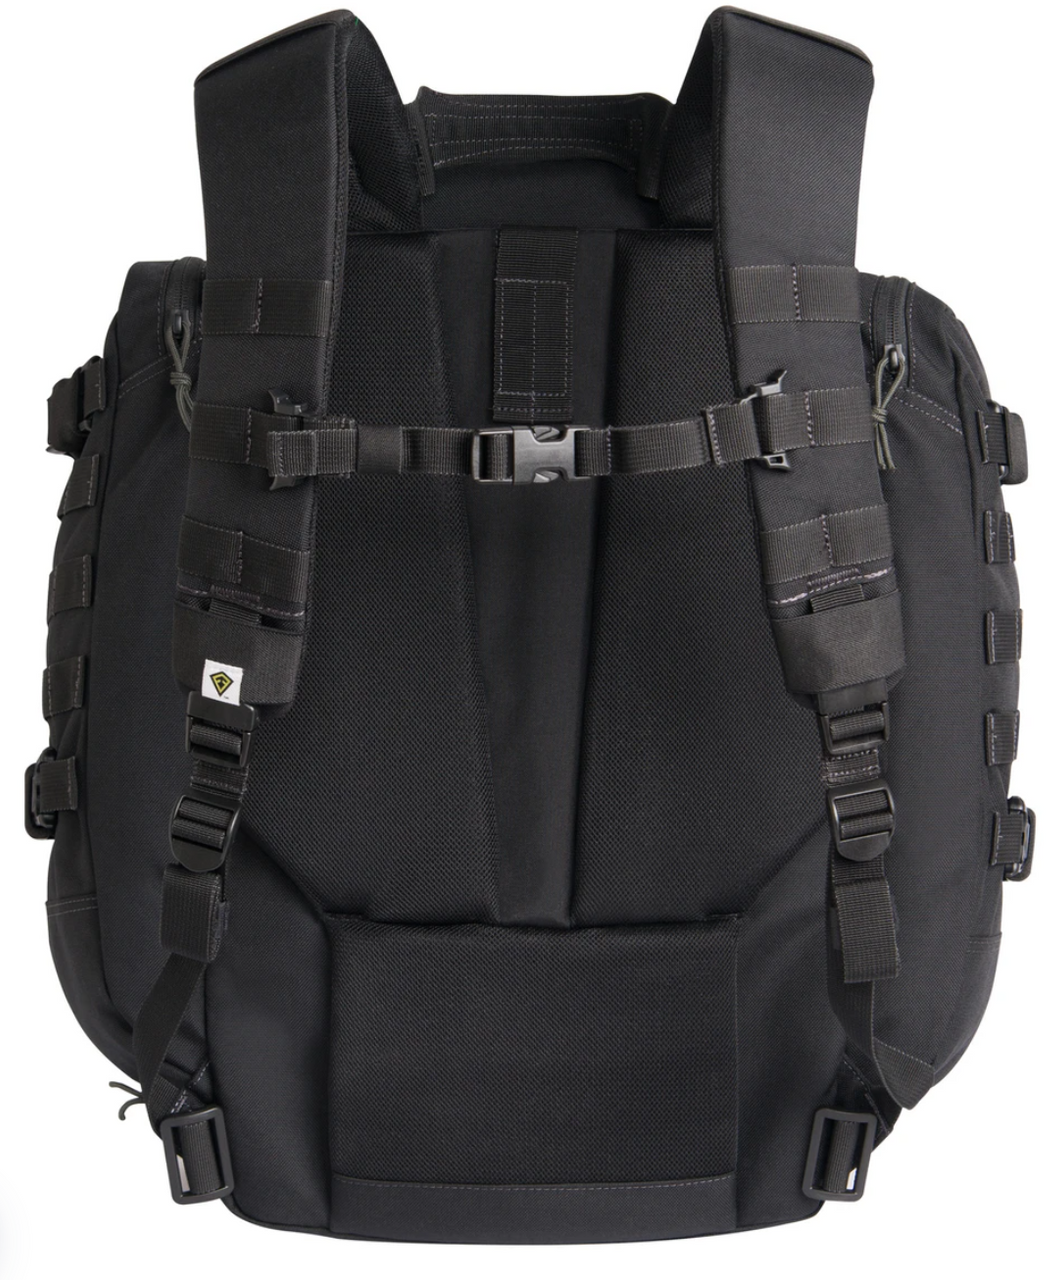 Dual density shoulder straps, double layered bottom, internal hook/loop mounting platform, and a fully functional hook/loop web platform compatible with MOLLE/PALS set this tactical pack apart from others in strength, reliability, and comfort for the wearer. With ample space for all of your gear, and featuring First Tactical’s new Hook & Hang Thru™ System, the Specialist 3-Day is the ideal backpack for longer missions.